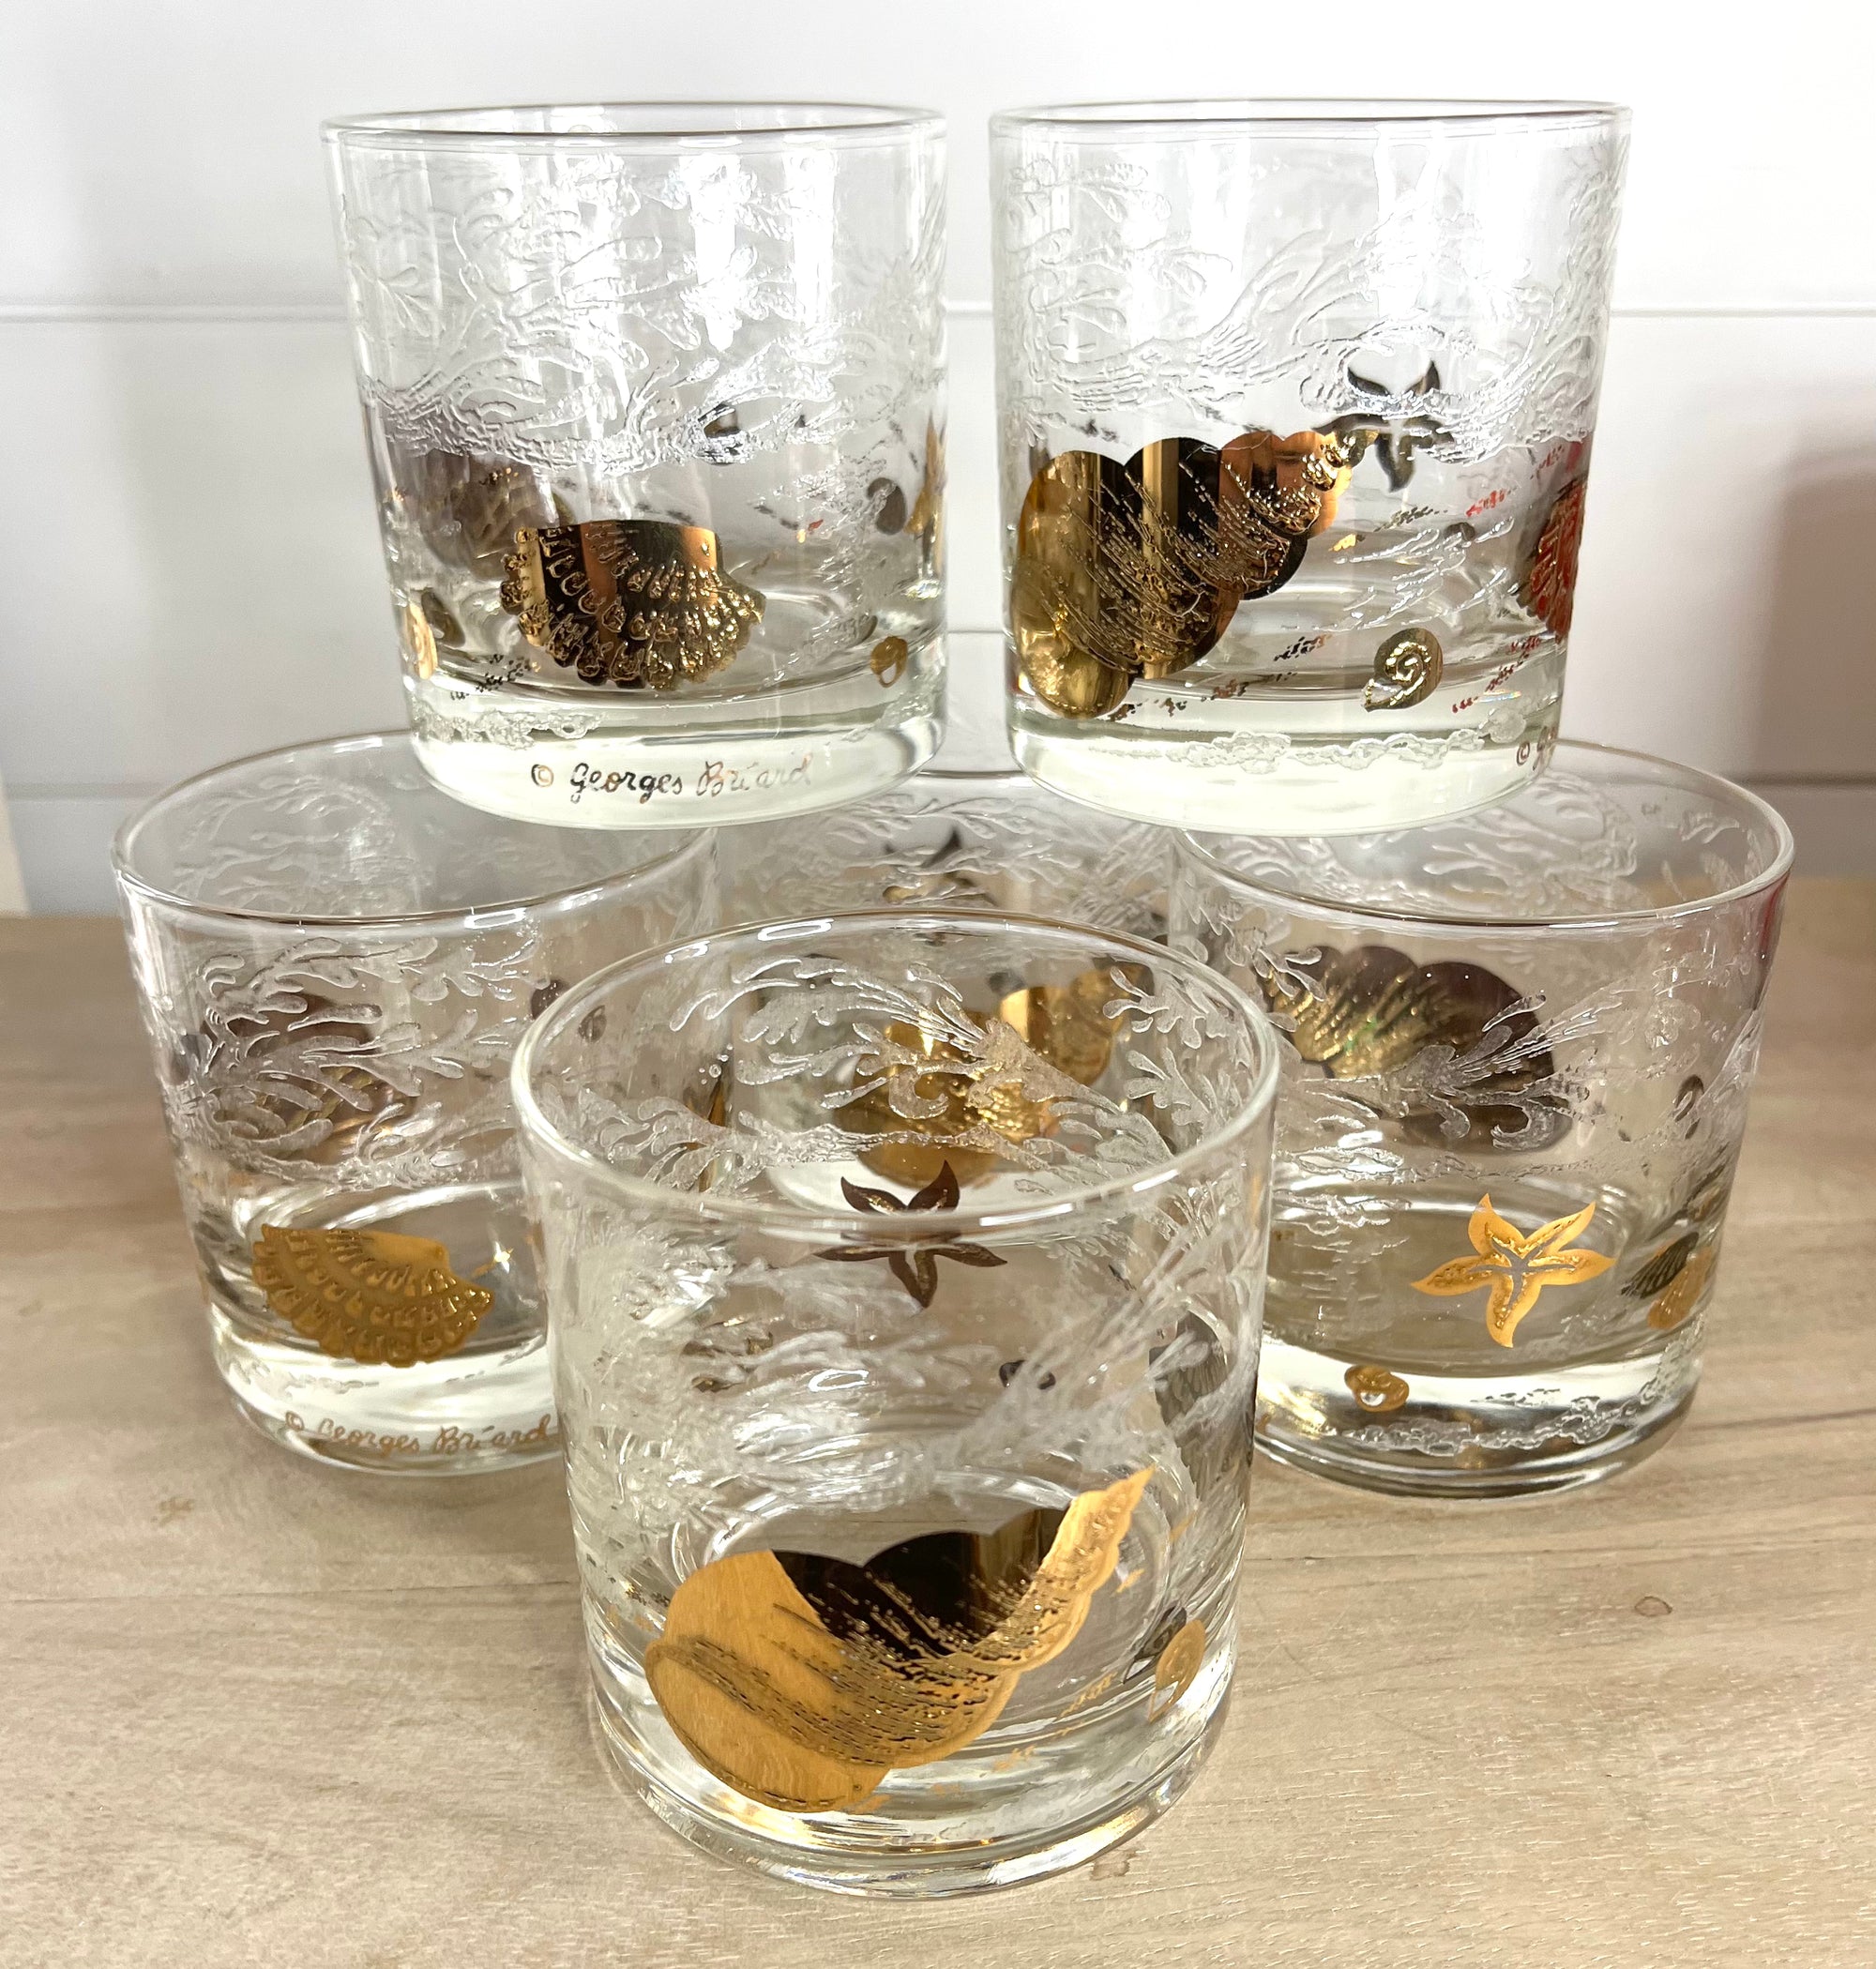 Georges Briard, Signed Vintage Mid-Century, Gold Shell Marine Theme, 12 oz Low Ball Glasses,   Set of 6